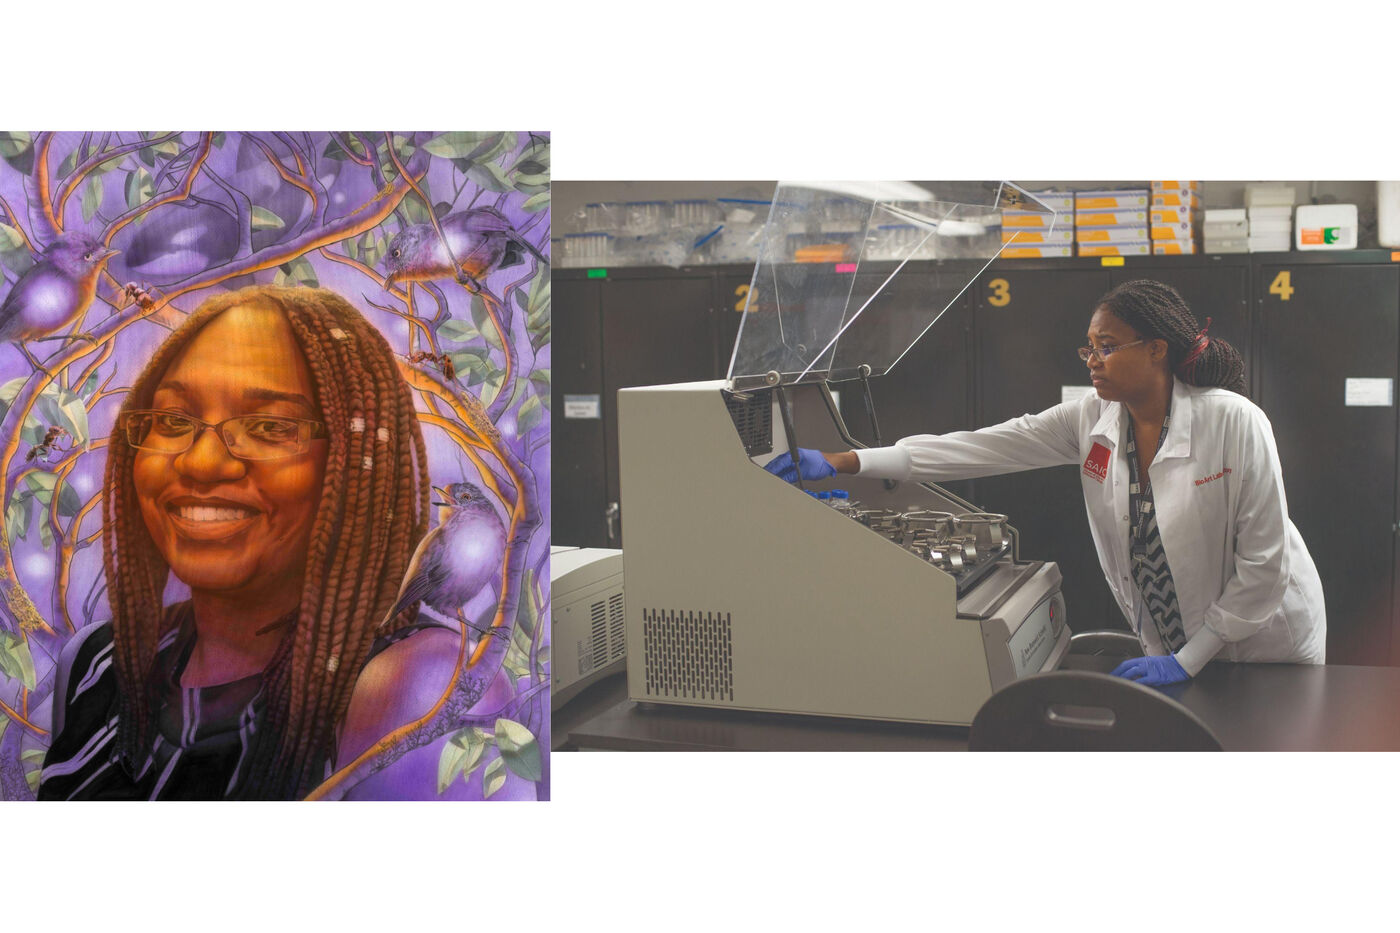 On the left is a painted mural portrait of Lynika Strozier; on the right, a woman wearing a white lab coat leans into a piece of lab equipment that is on a table in a laboratory classroom.